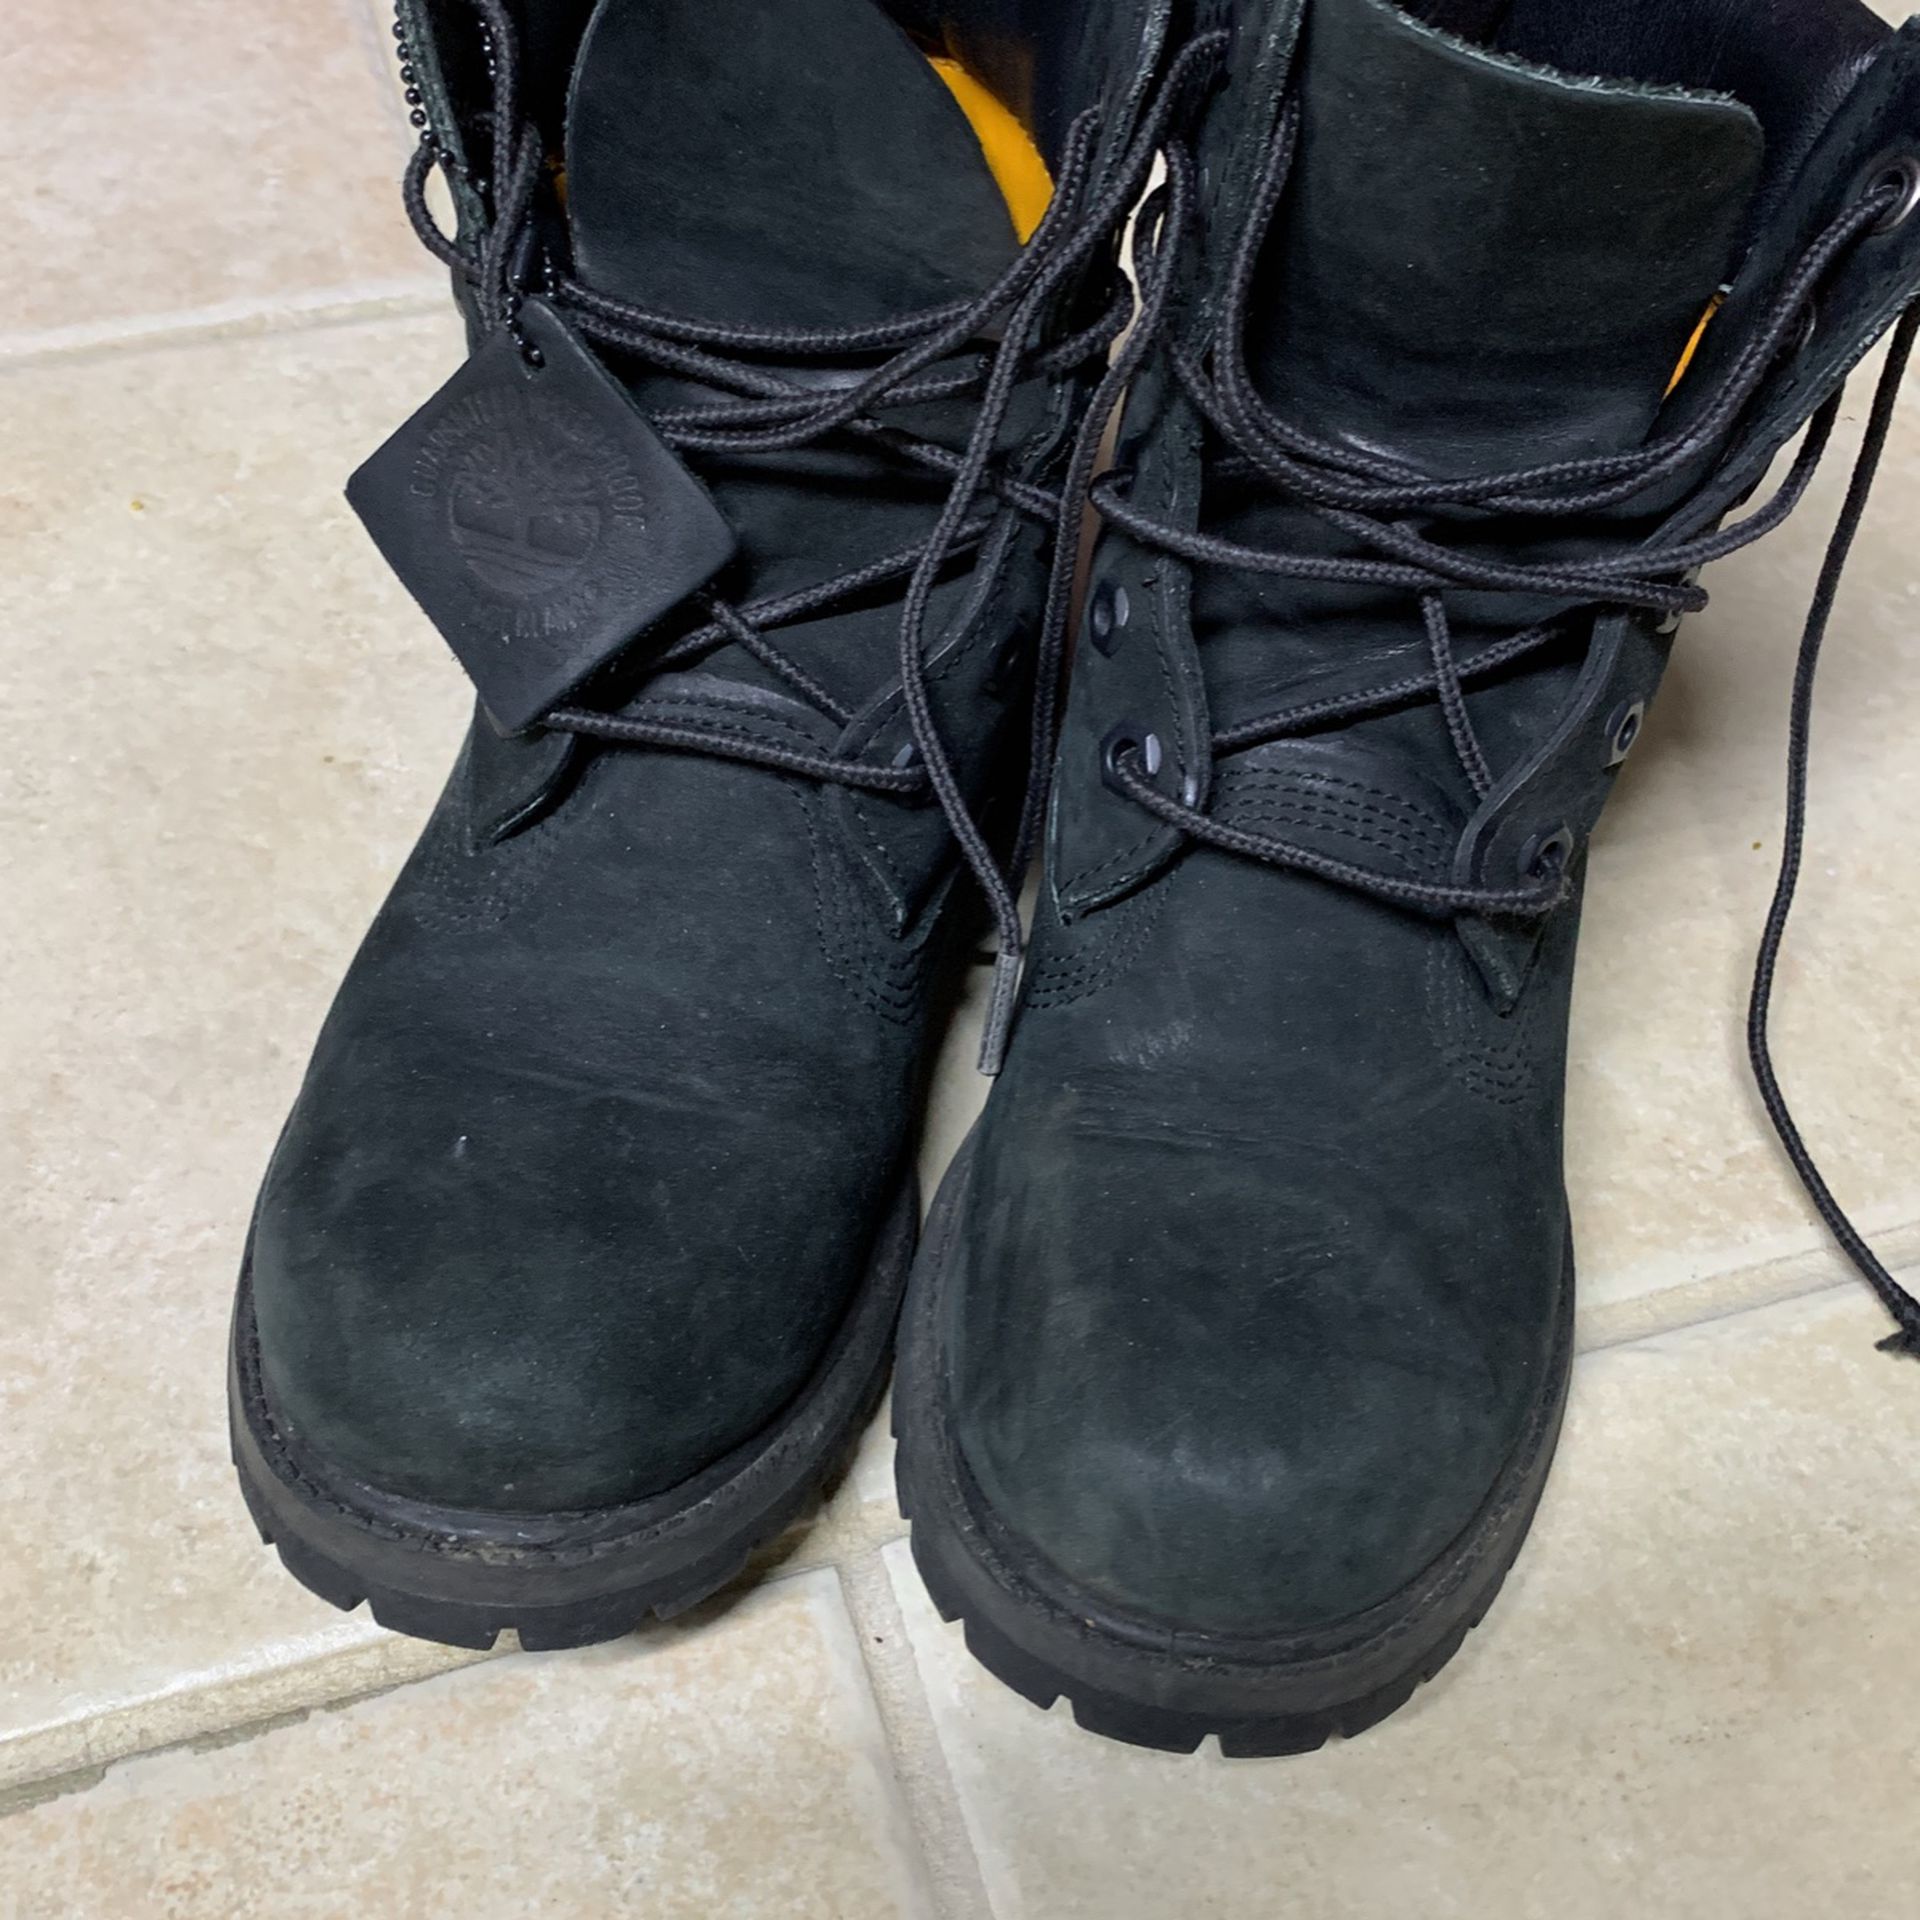 Timberland Boots (for Women) Black Color, Size 7 . In Excellent Condition 